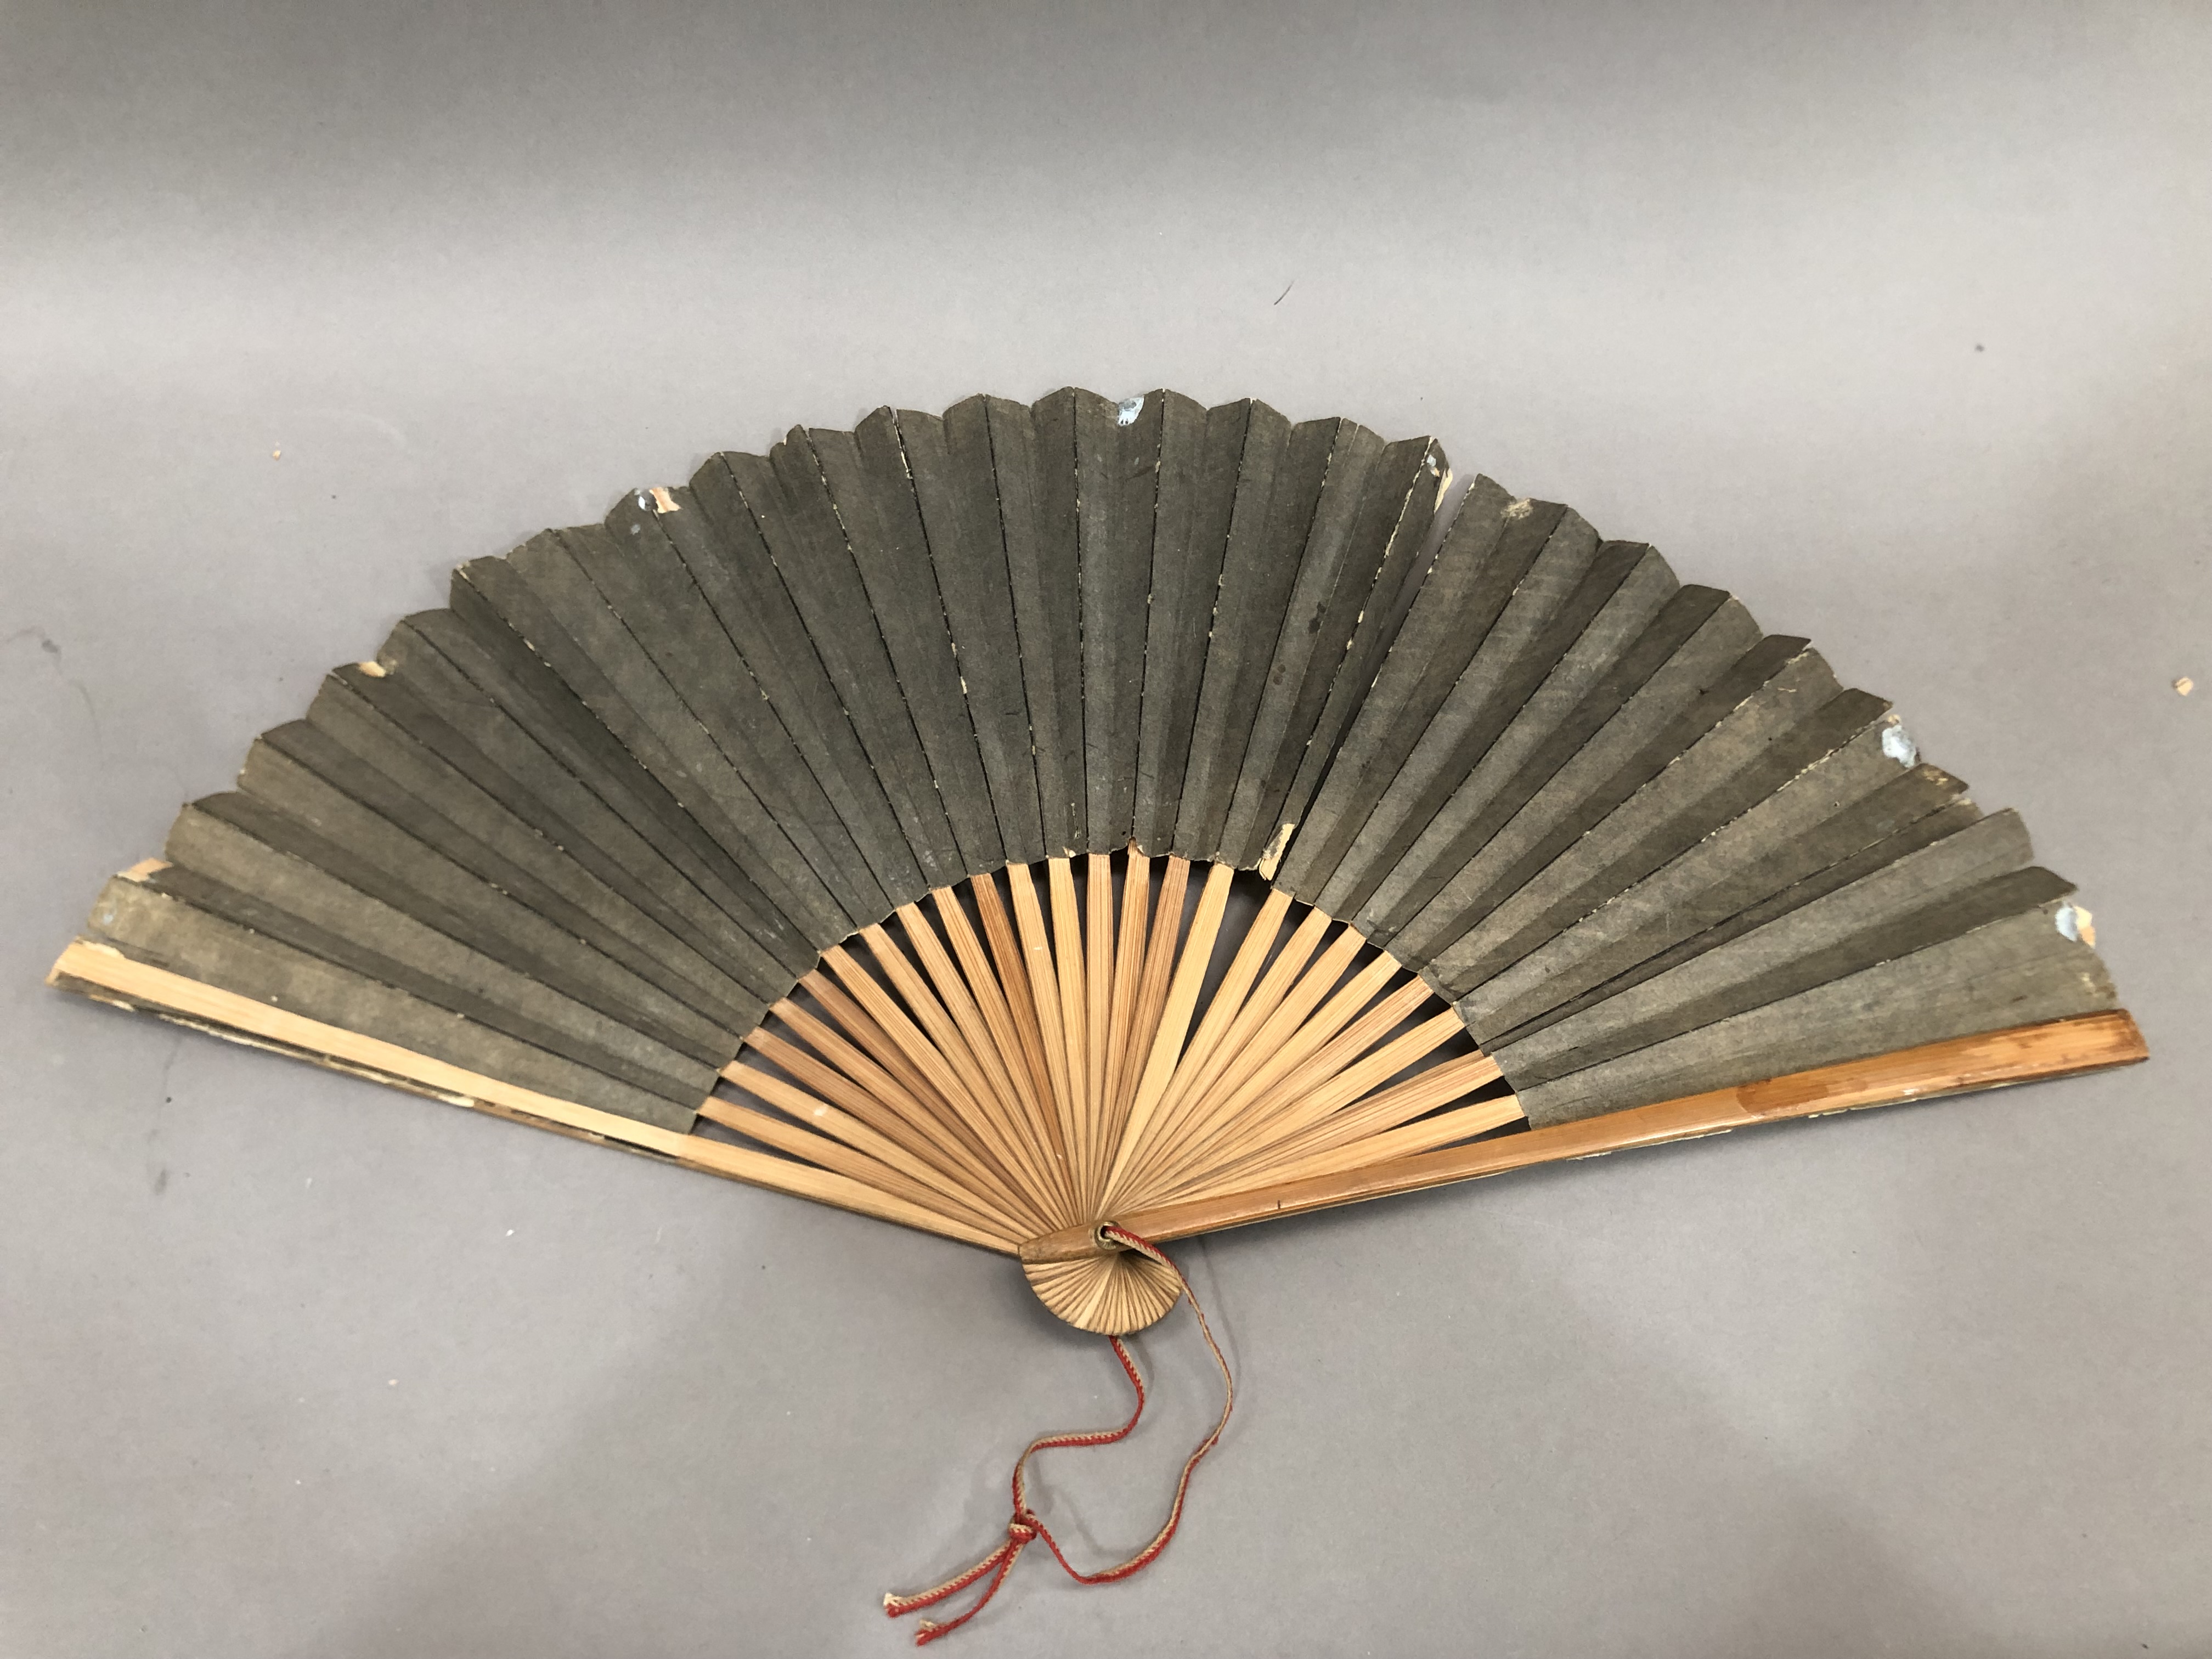 Chinese Topographical Fan: a very unusual paper fan with bamboo sticks, 19th century or earlier, the - Image 5 of 6